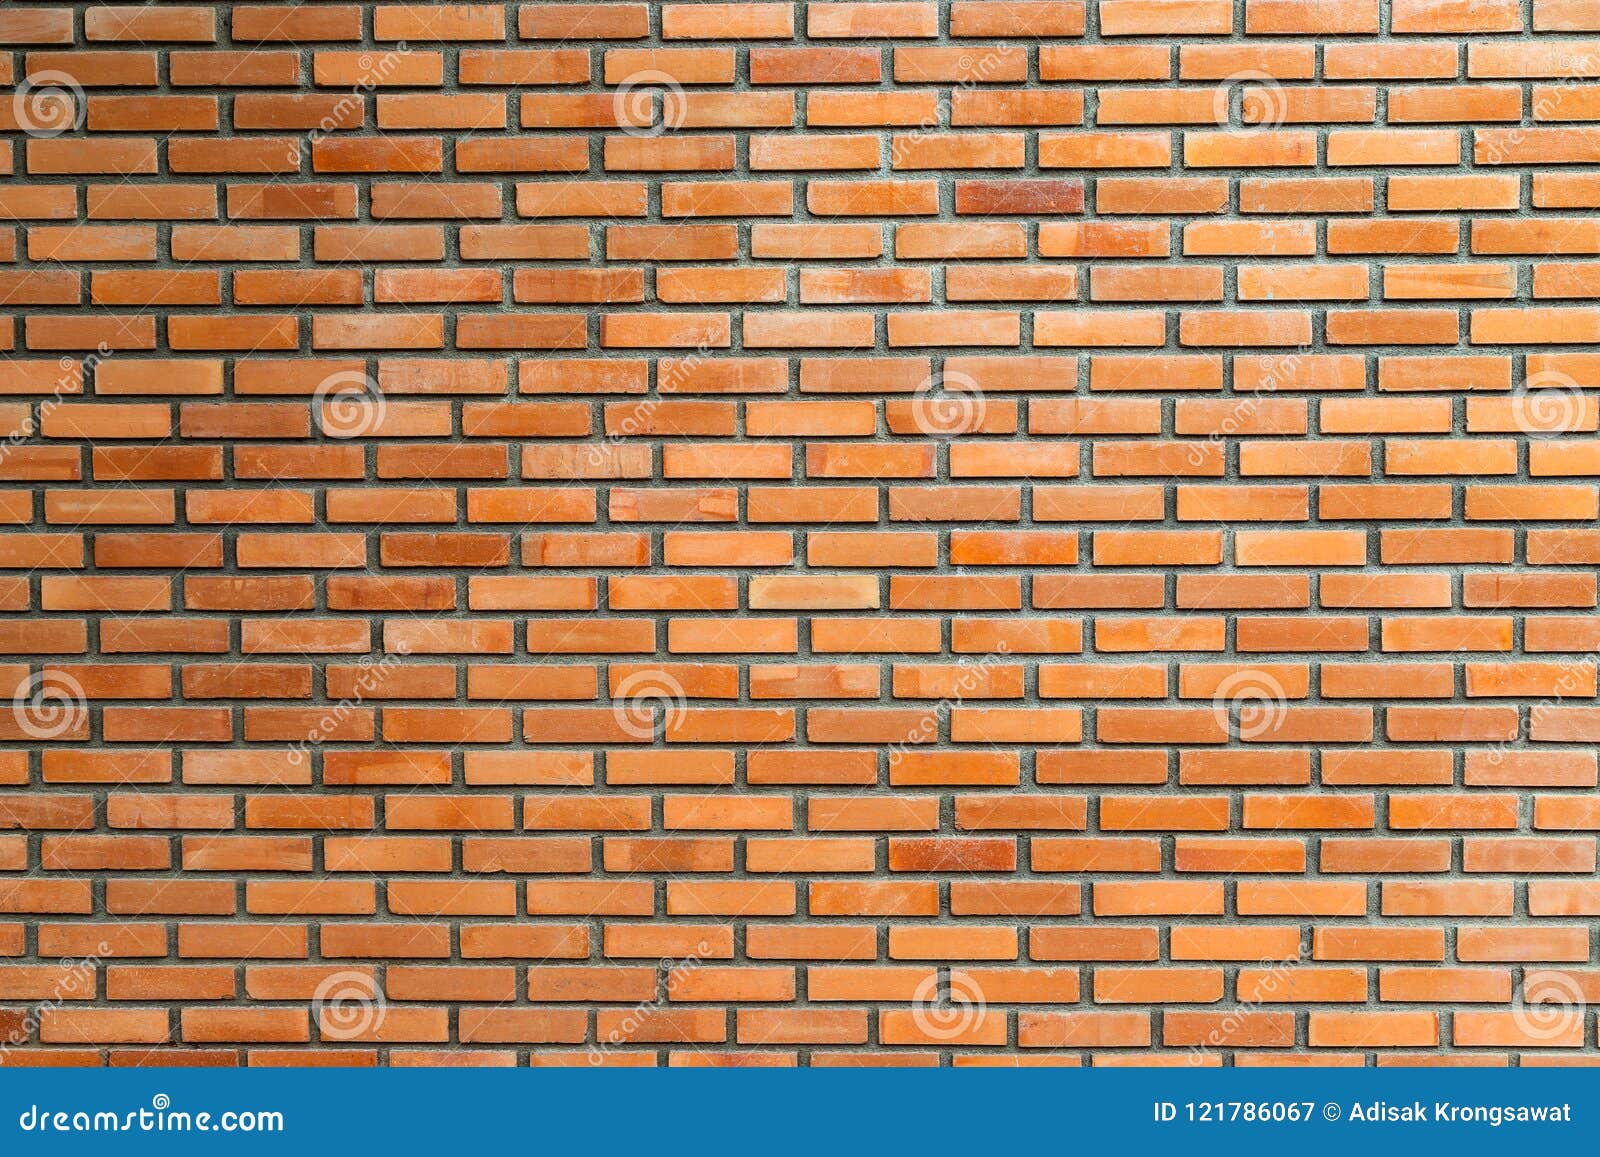 Brick Wall Texture On Rustic Background Stock Image Image